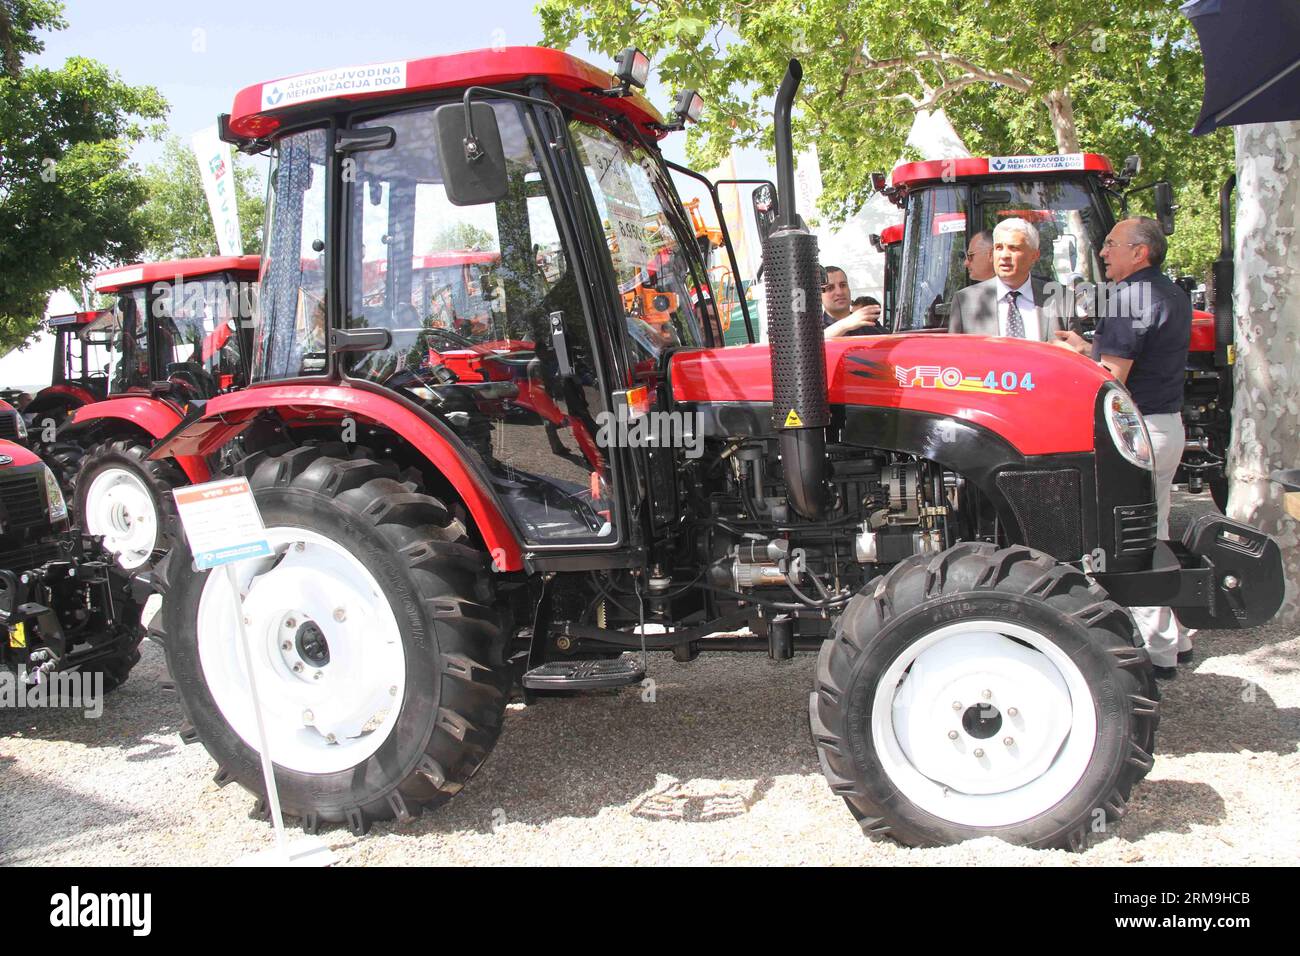 Picture taken on May 23, 2014 shows that machines are displaying during the Novi Sad agriculture fair, in Novi Sad, Serbia. About 1,500 companies participated in the 2014 agriculture fair in Novi Sad, Serbia. The 81st International Agricultural Fair that opened on May 20 displays the latest machines and other products from agricultural industry, as well as livestock.(Xinhua/Nemanja Cabric) (cy) SERBIA-NOVI SAD-AGRICULTURE FAIR PUBLICATIONxNOTxINxCHN   Picture Taken ON May 23 2014 Shows Thatcher Machines are displaying during The Novi Sad Agriculture Fair in Novi Sad Serbia About 1 500 Companie Stock Photo